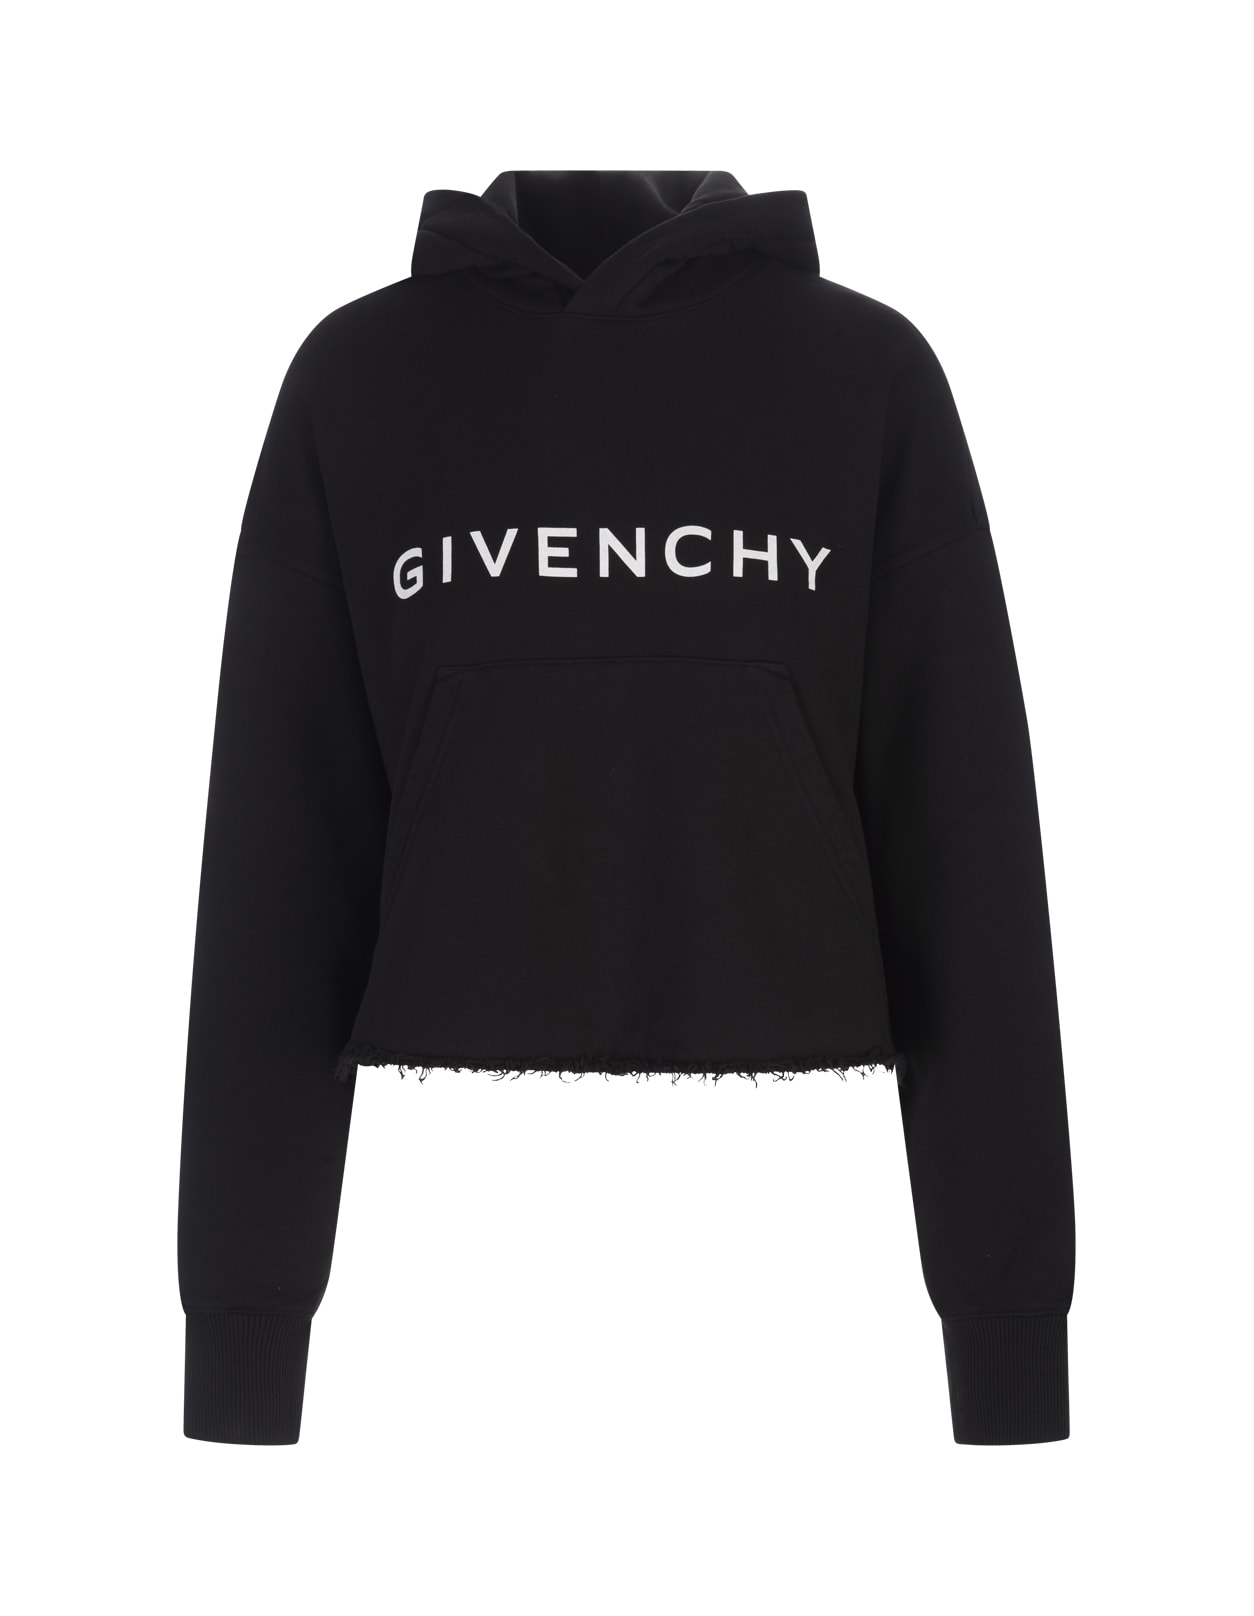 Givenchy Archetype Hoodie In Black Gauzed Fabric